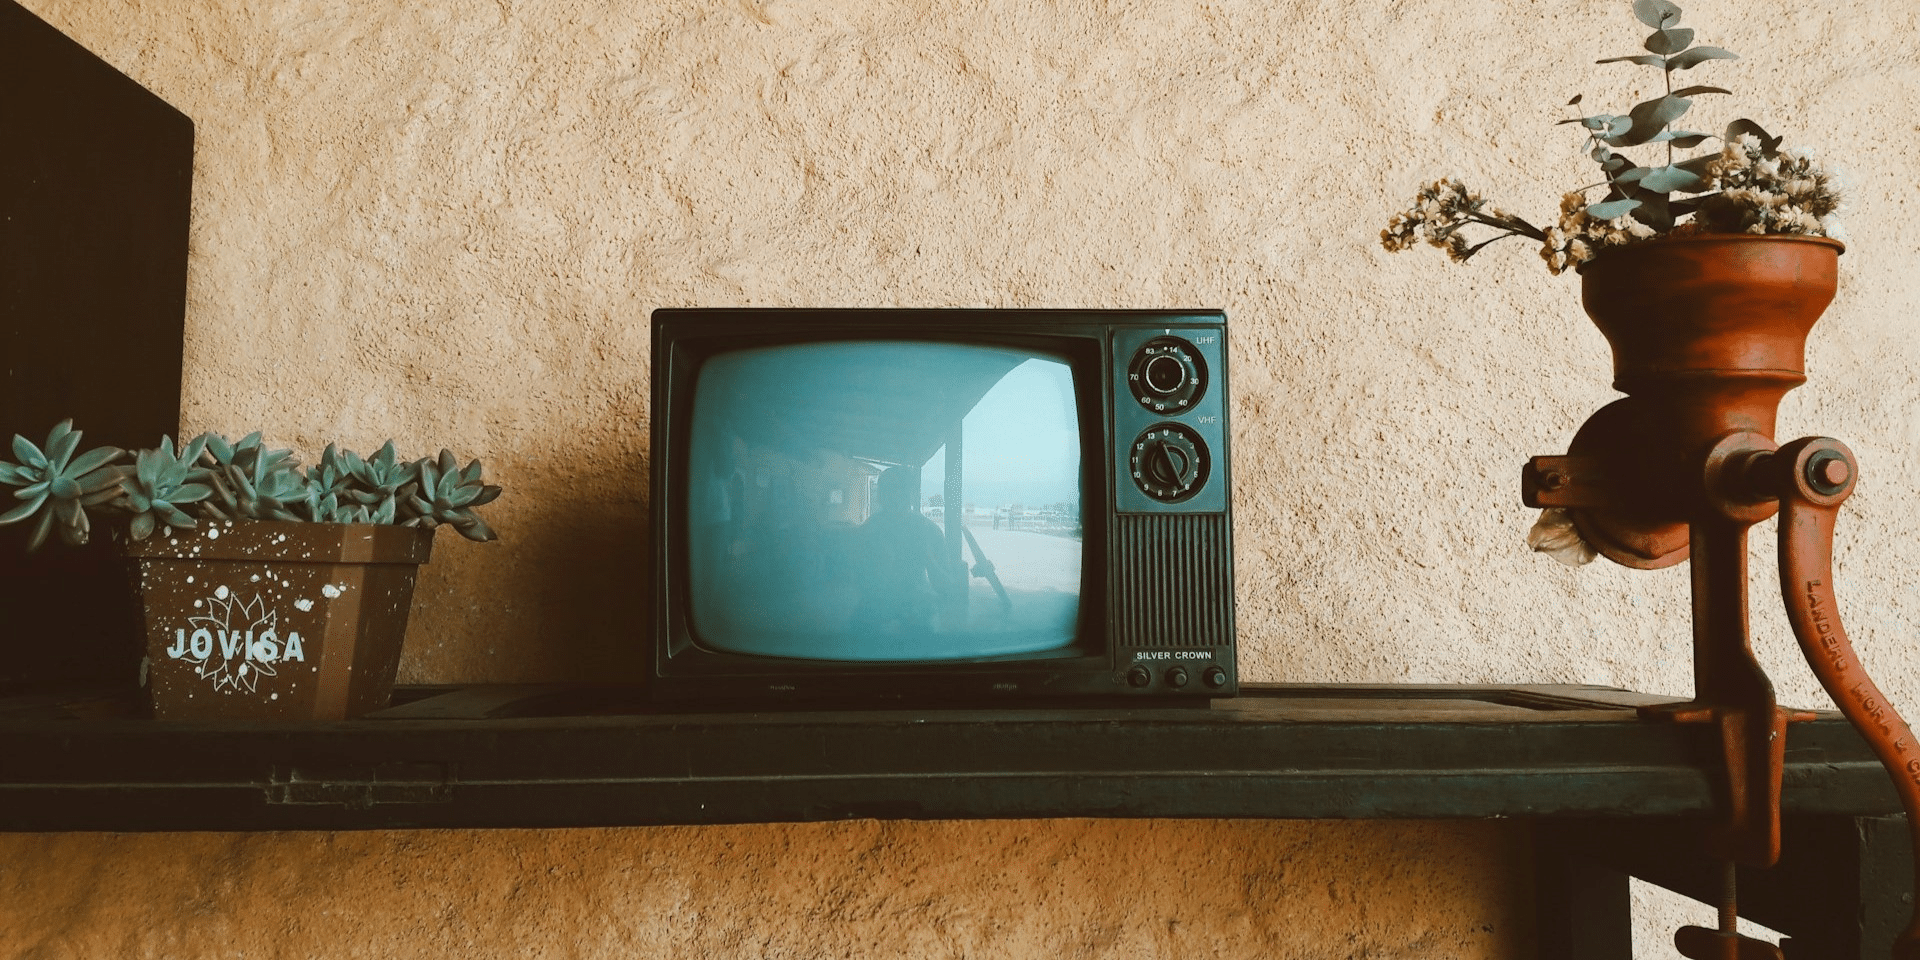 Evolution of Televisions: A Journey Through Innovation